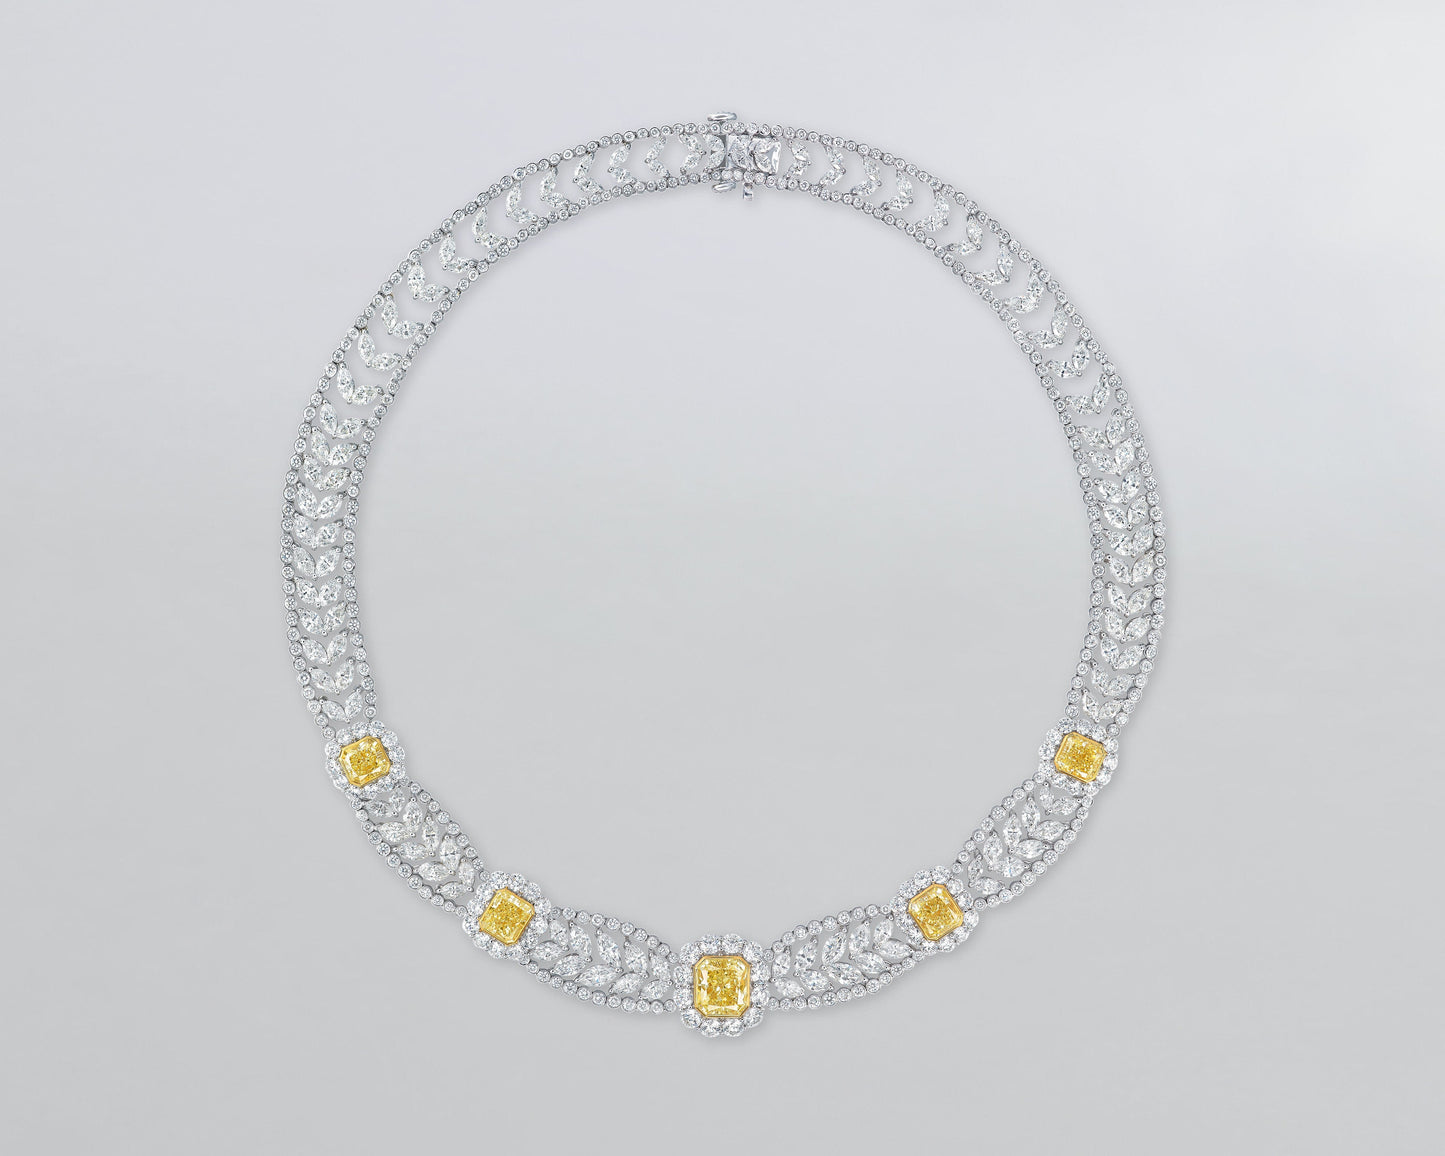 Radiant Cut Fancy Yellow and White Diamond Necklace